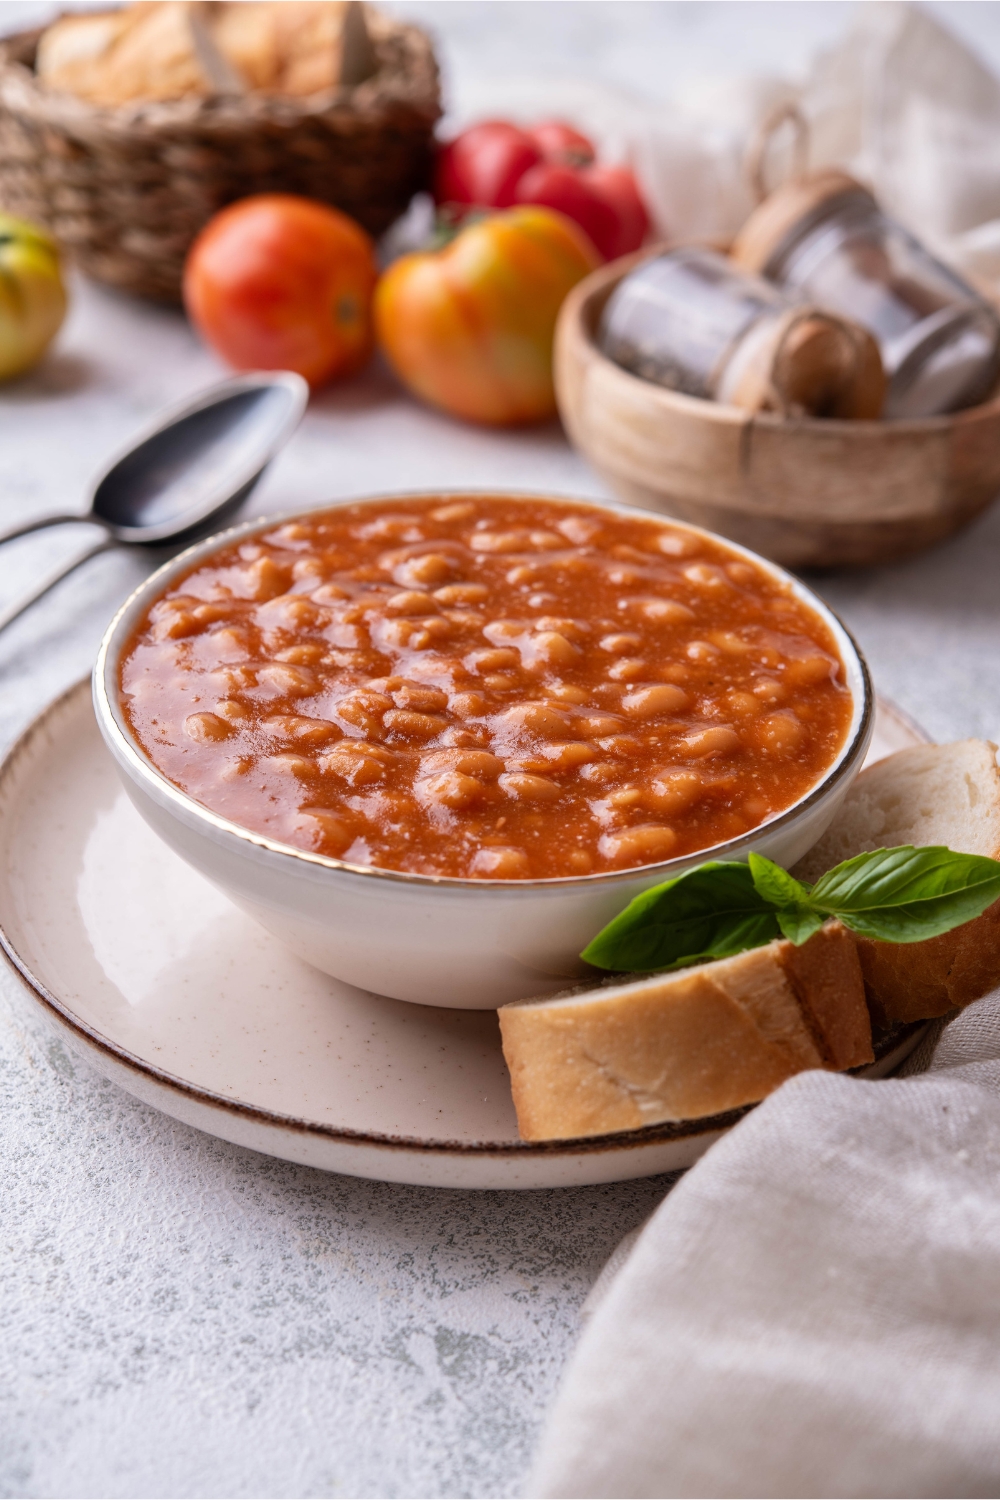 Baked beans in a white bowl served bread slices.